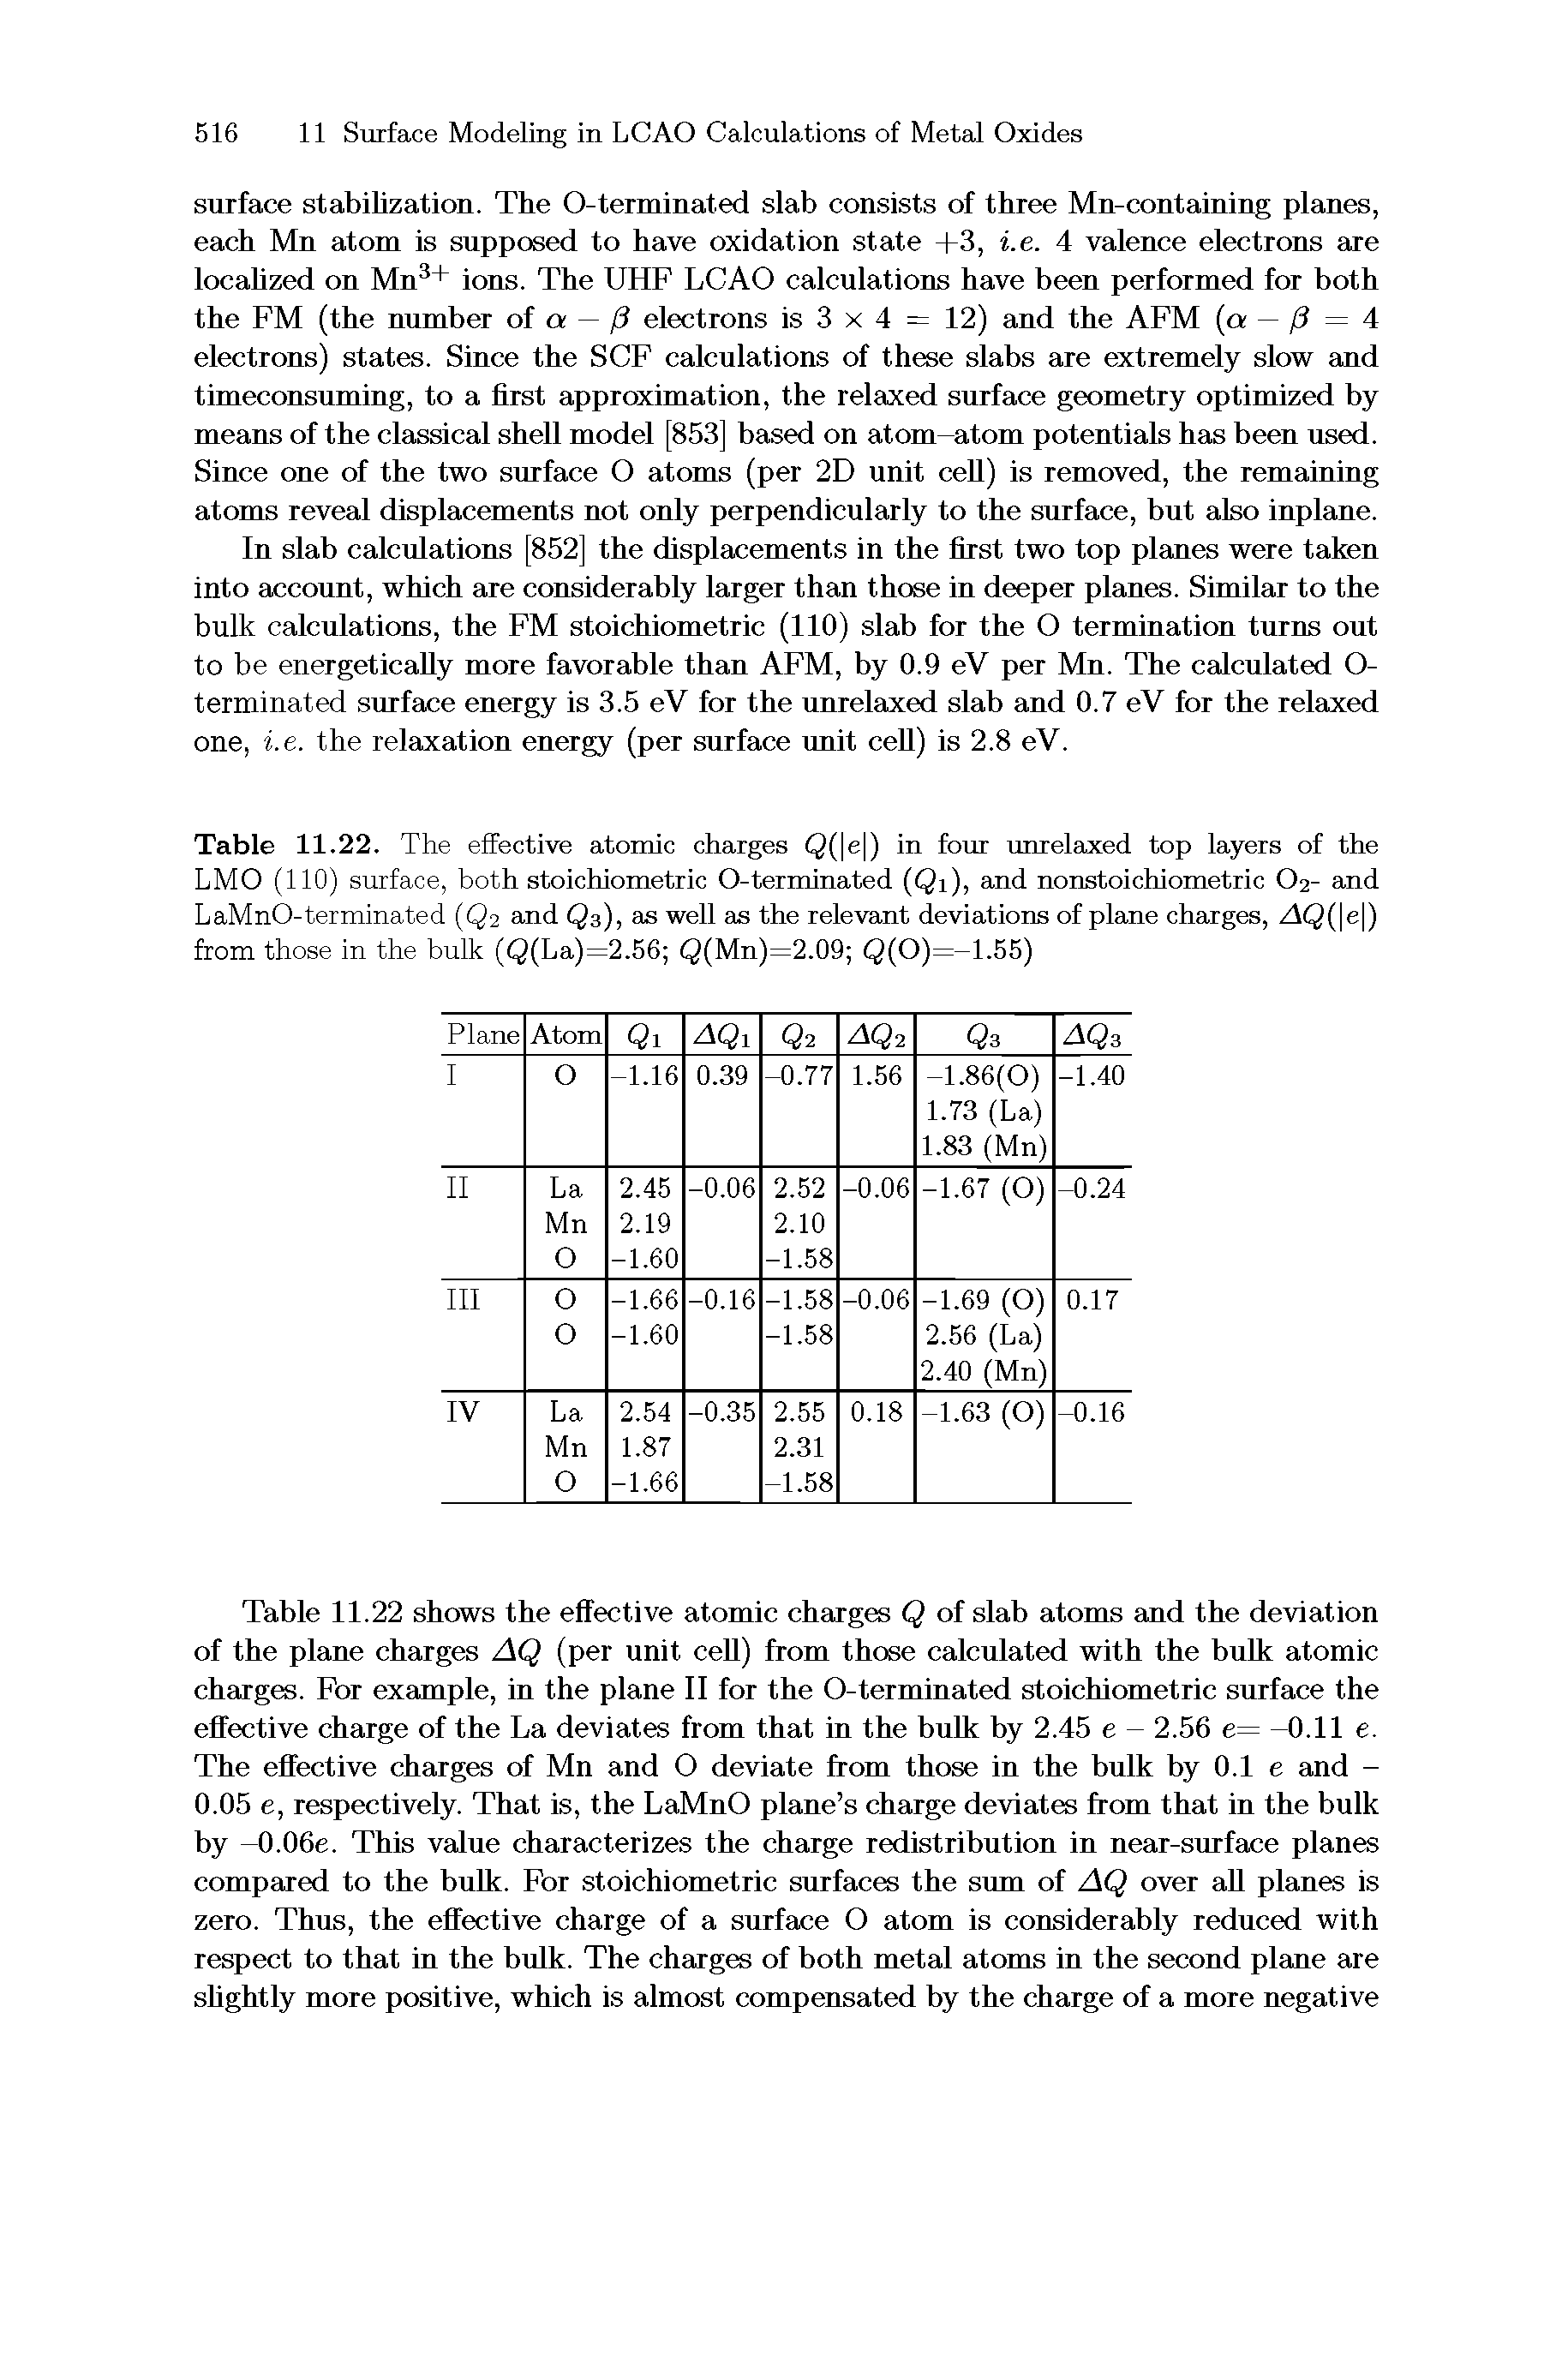 Table 11.22. The effective atomic charges Q( e ) in four unxelaxed top layers of the LMO (110) surface, both stoichiometric O-terminated (Qi), and nonstoichiometric O2- and LaMnO-terminated (Q2 and Qs), as well as the relevant deviations of plane charges, AQ e ) from those in the bulk (Q(La)=2.56 Q(Mn)=2.09 (5(0)=-1.55)...